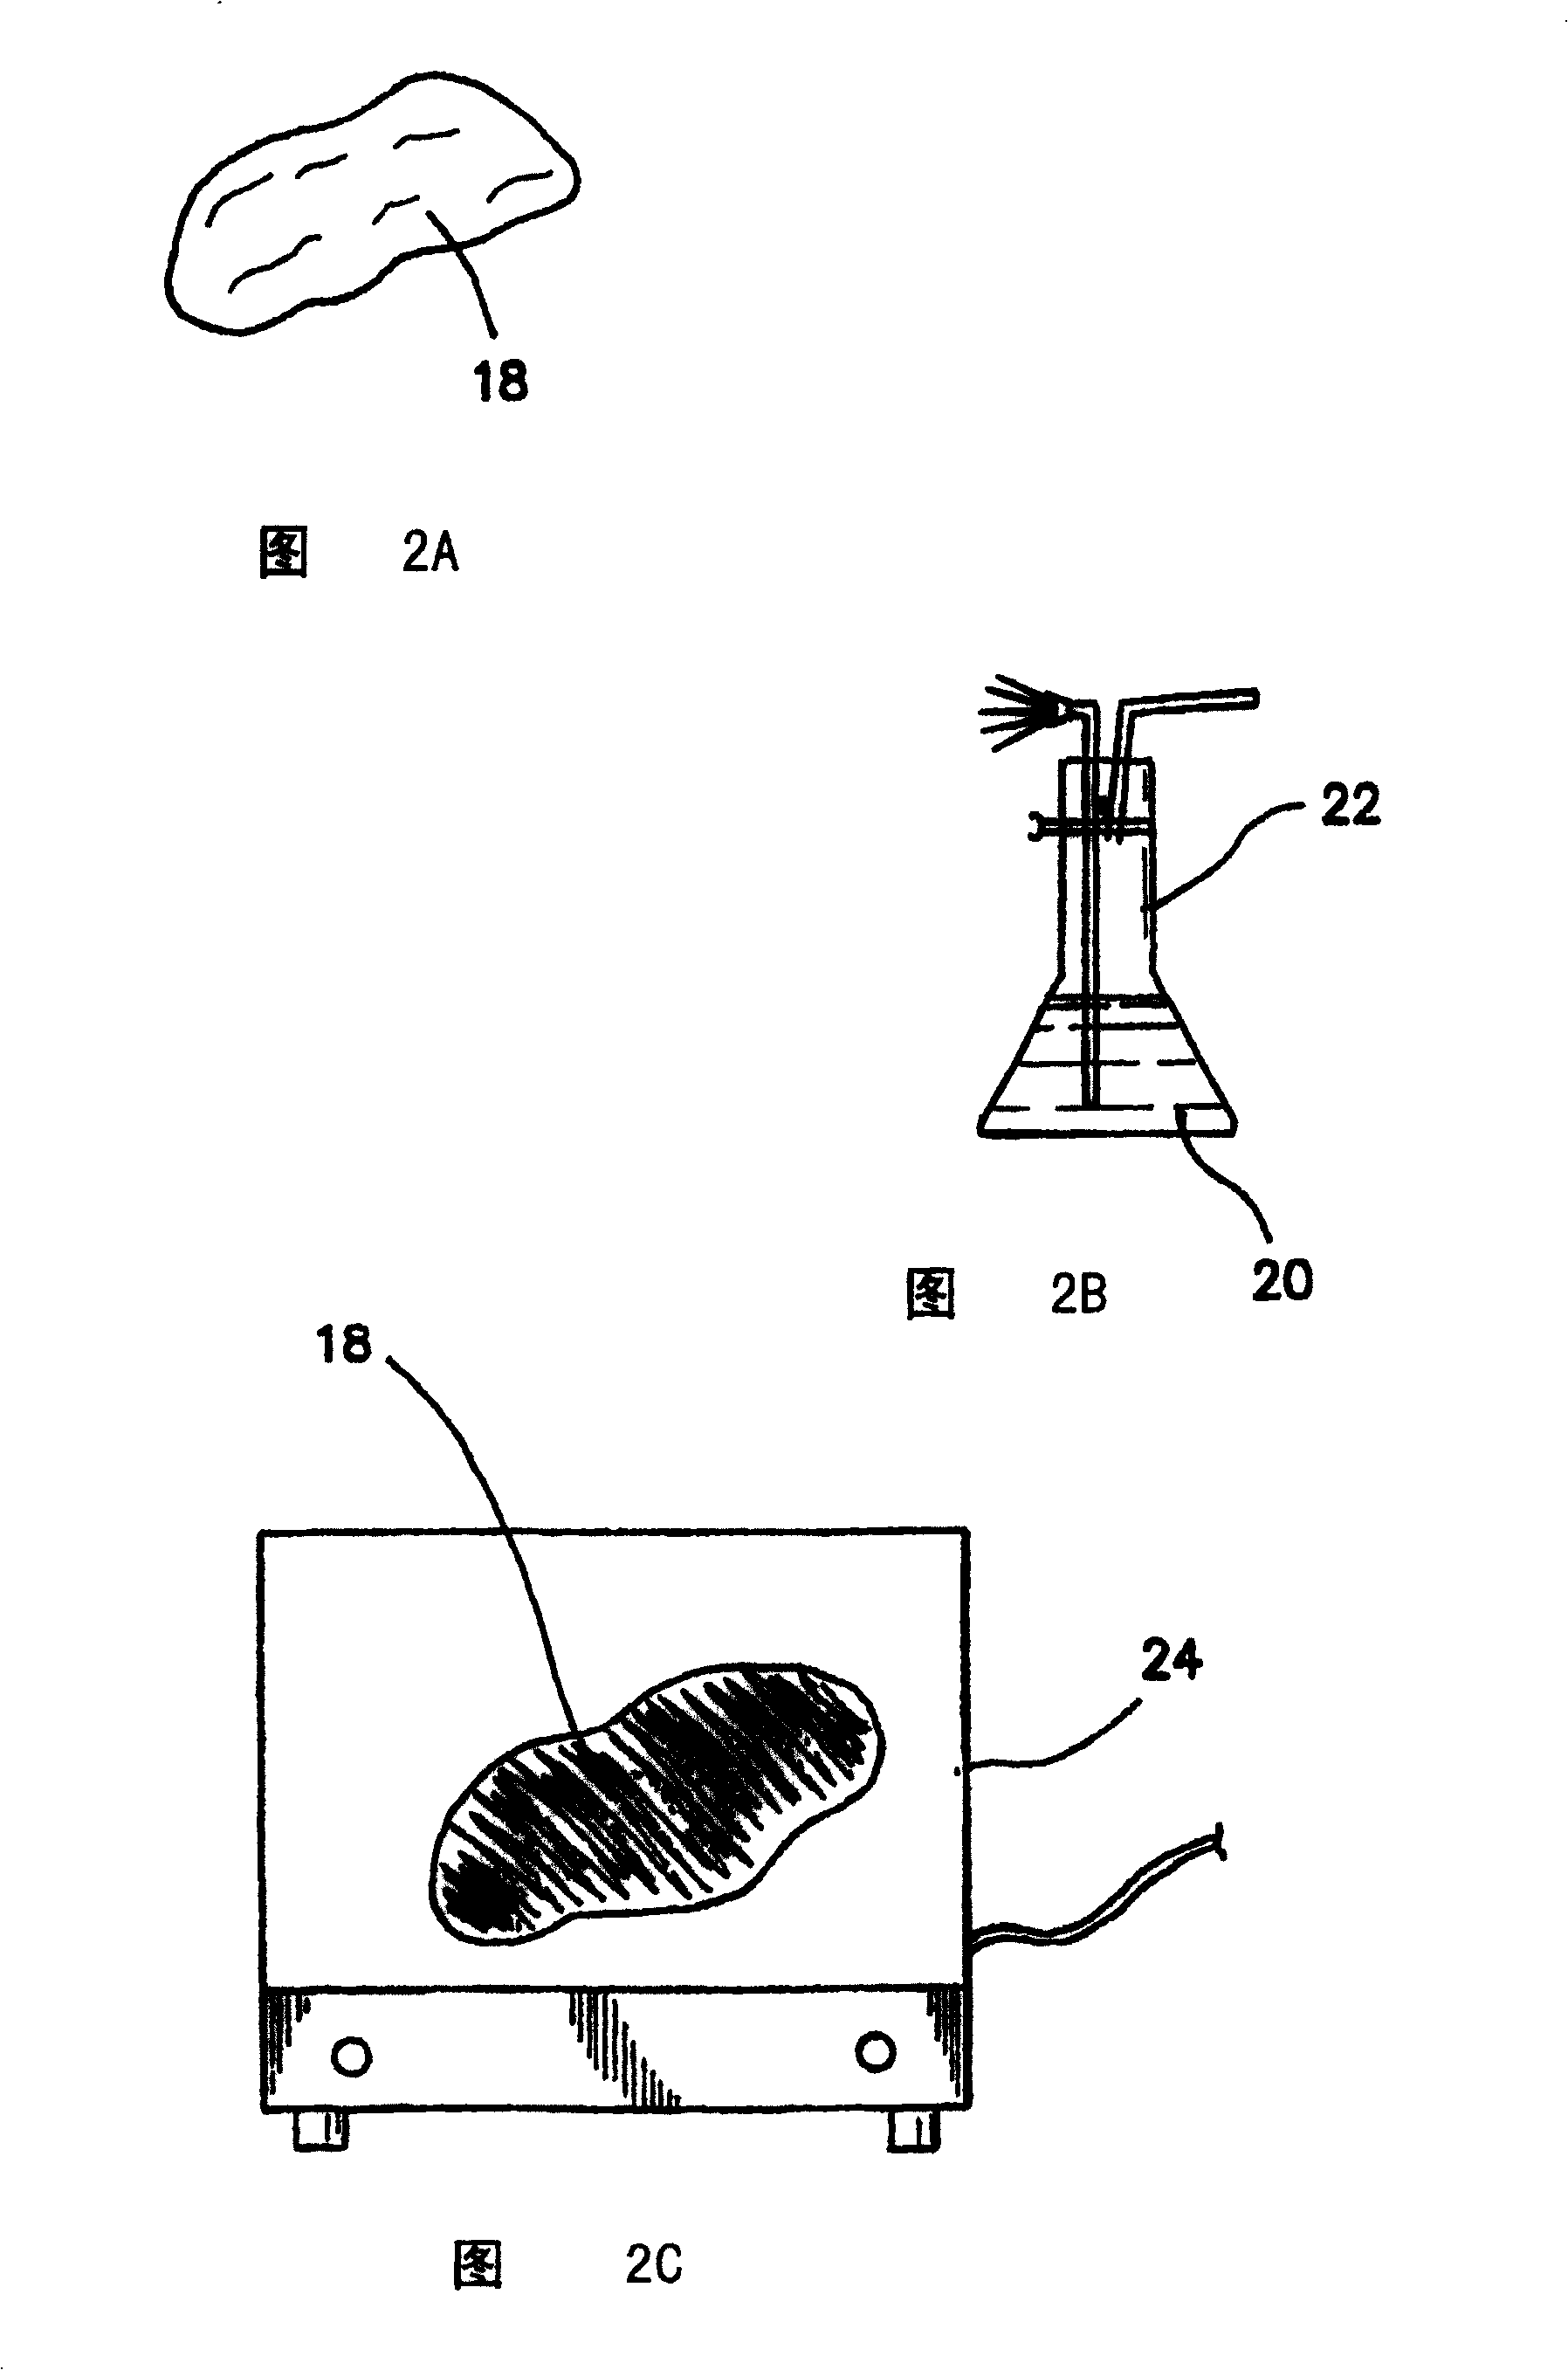 Apparatus for preventing adhesions between an implant and surrounding tissues